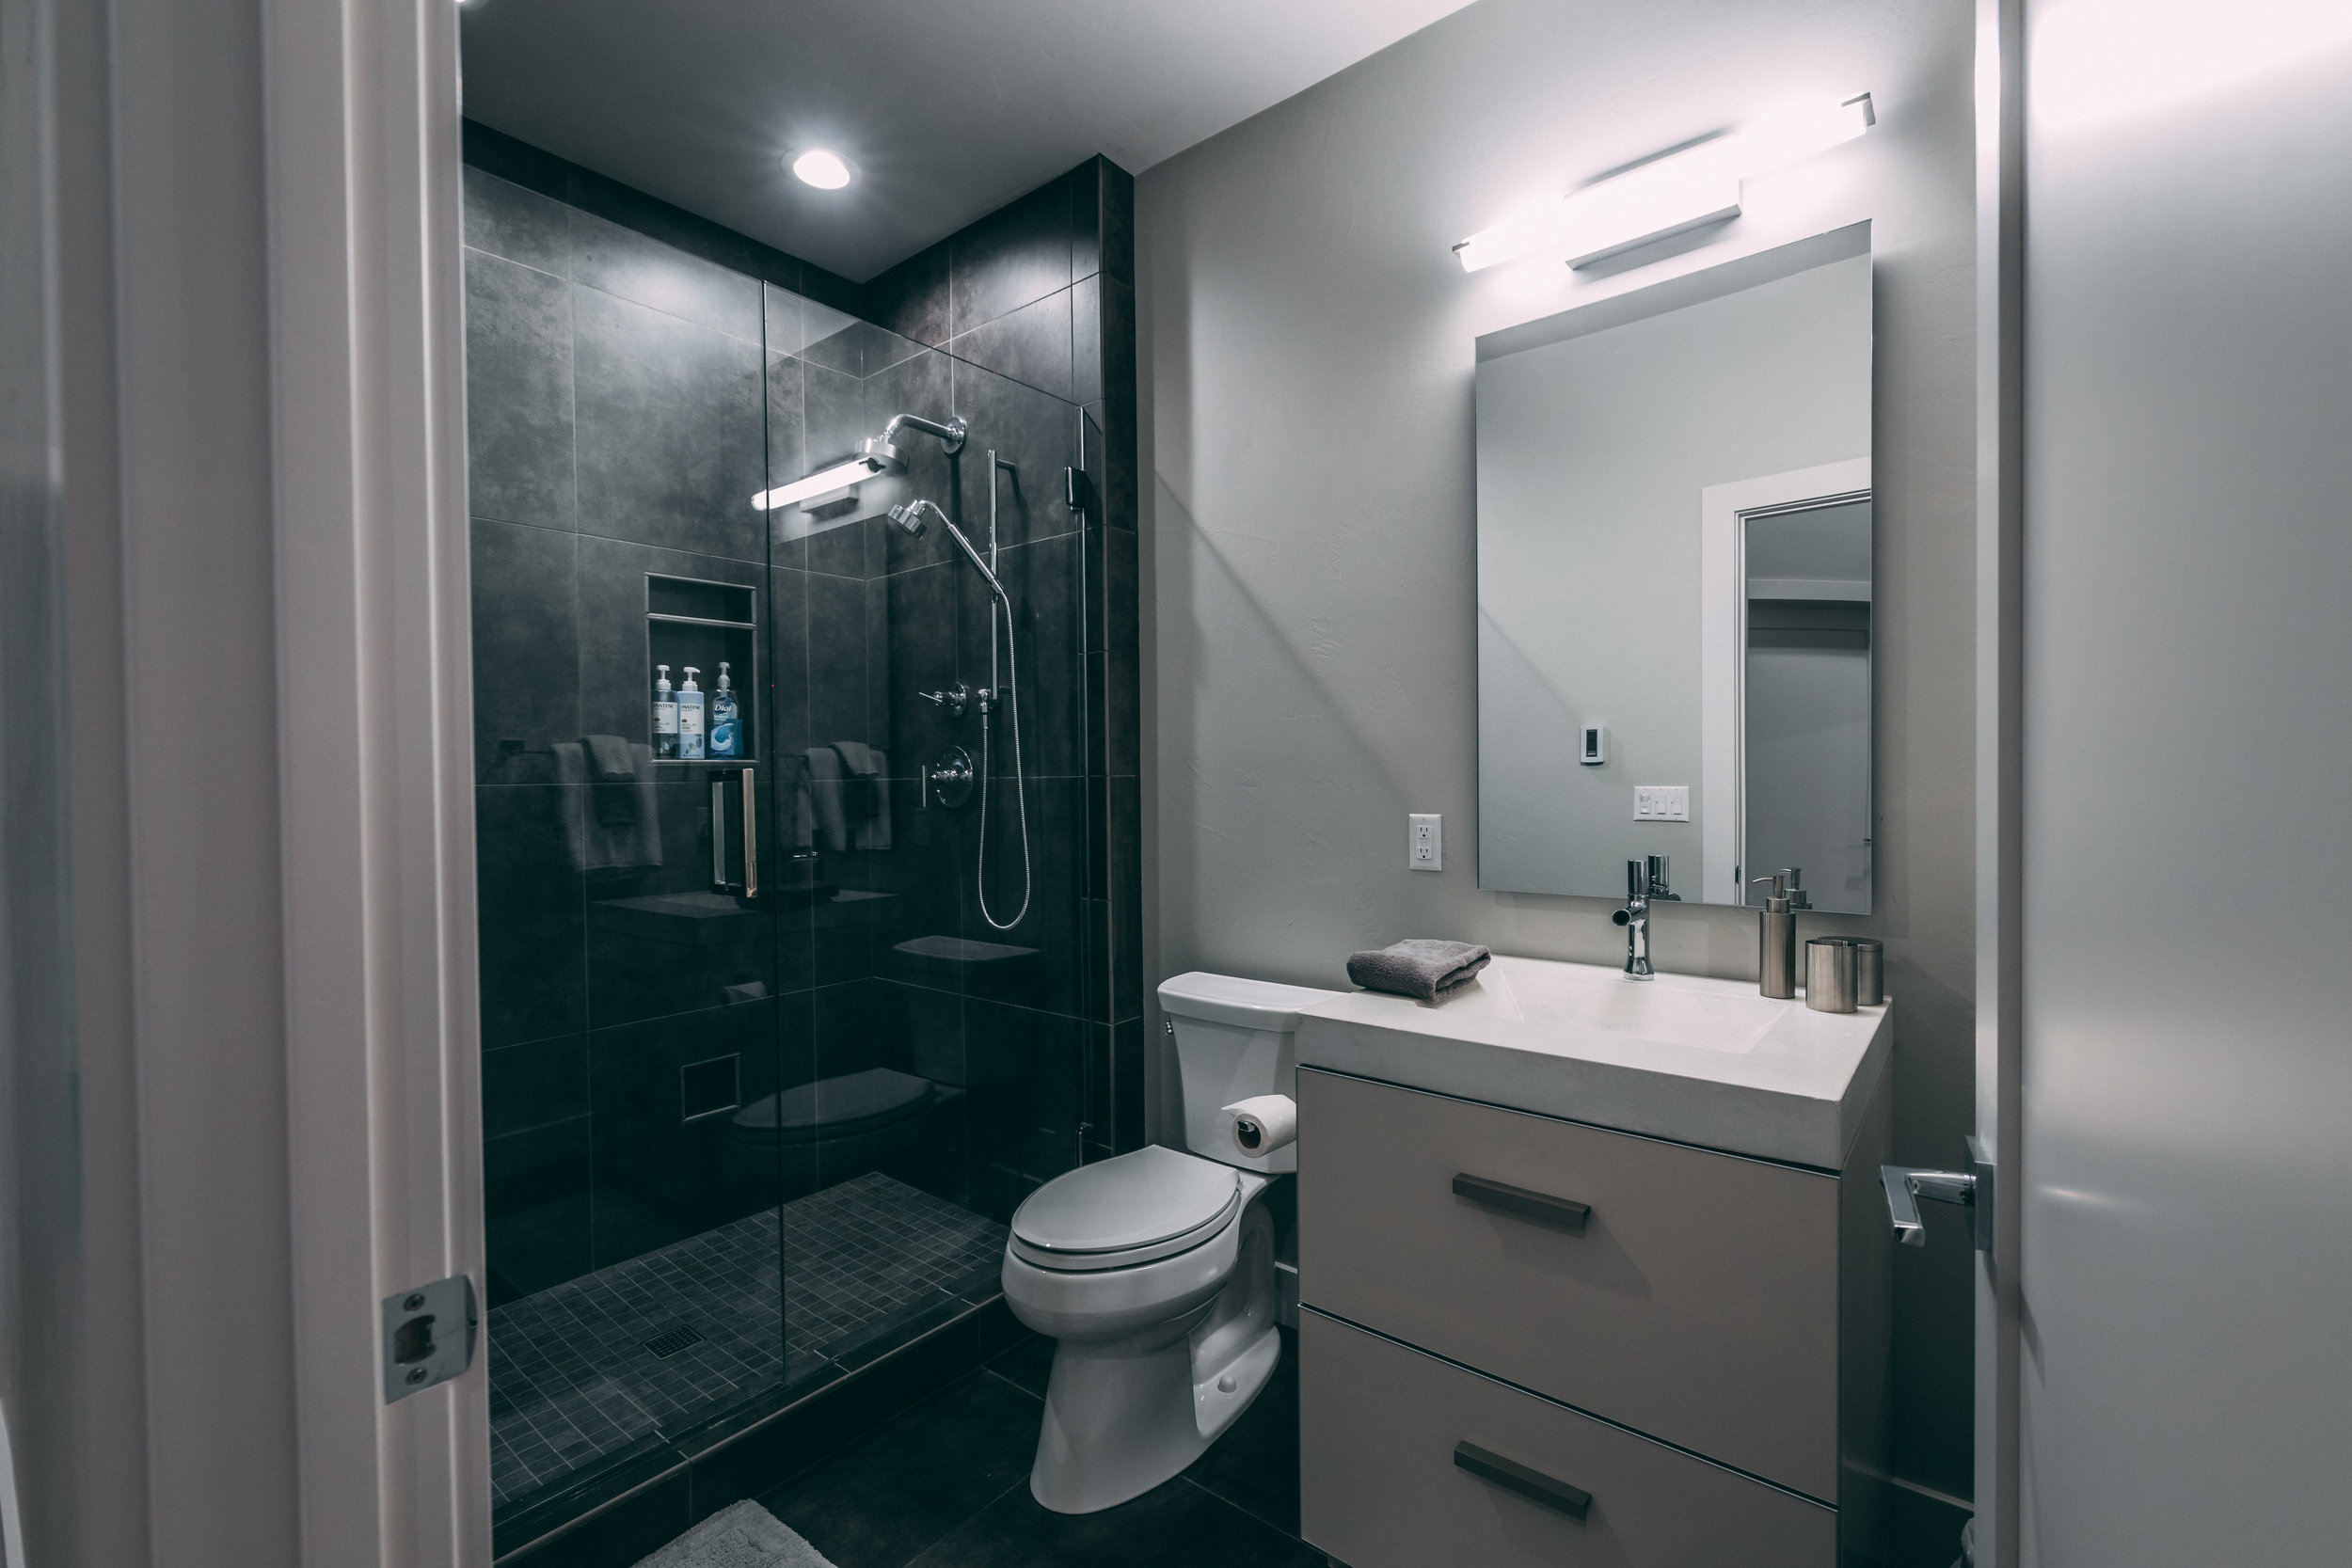 Monte Carlo's guest bathroom is created around KOHLER's simplistic and strong faucets and quality.